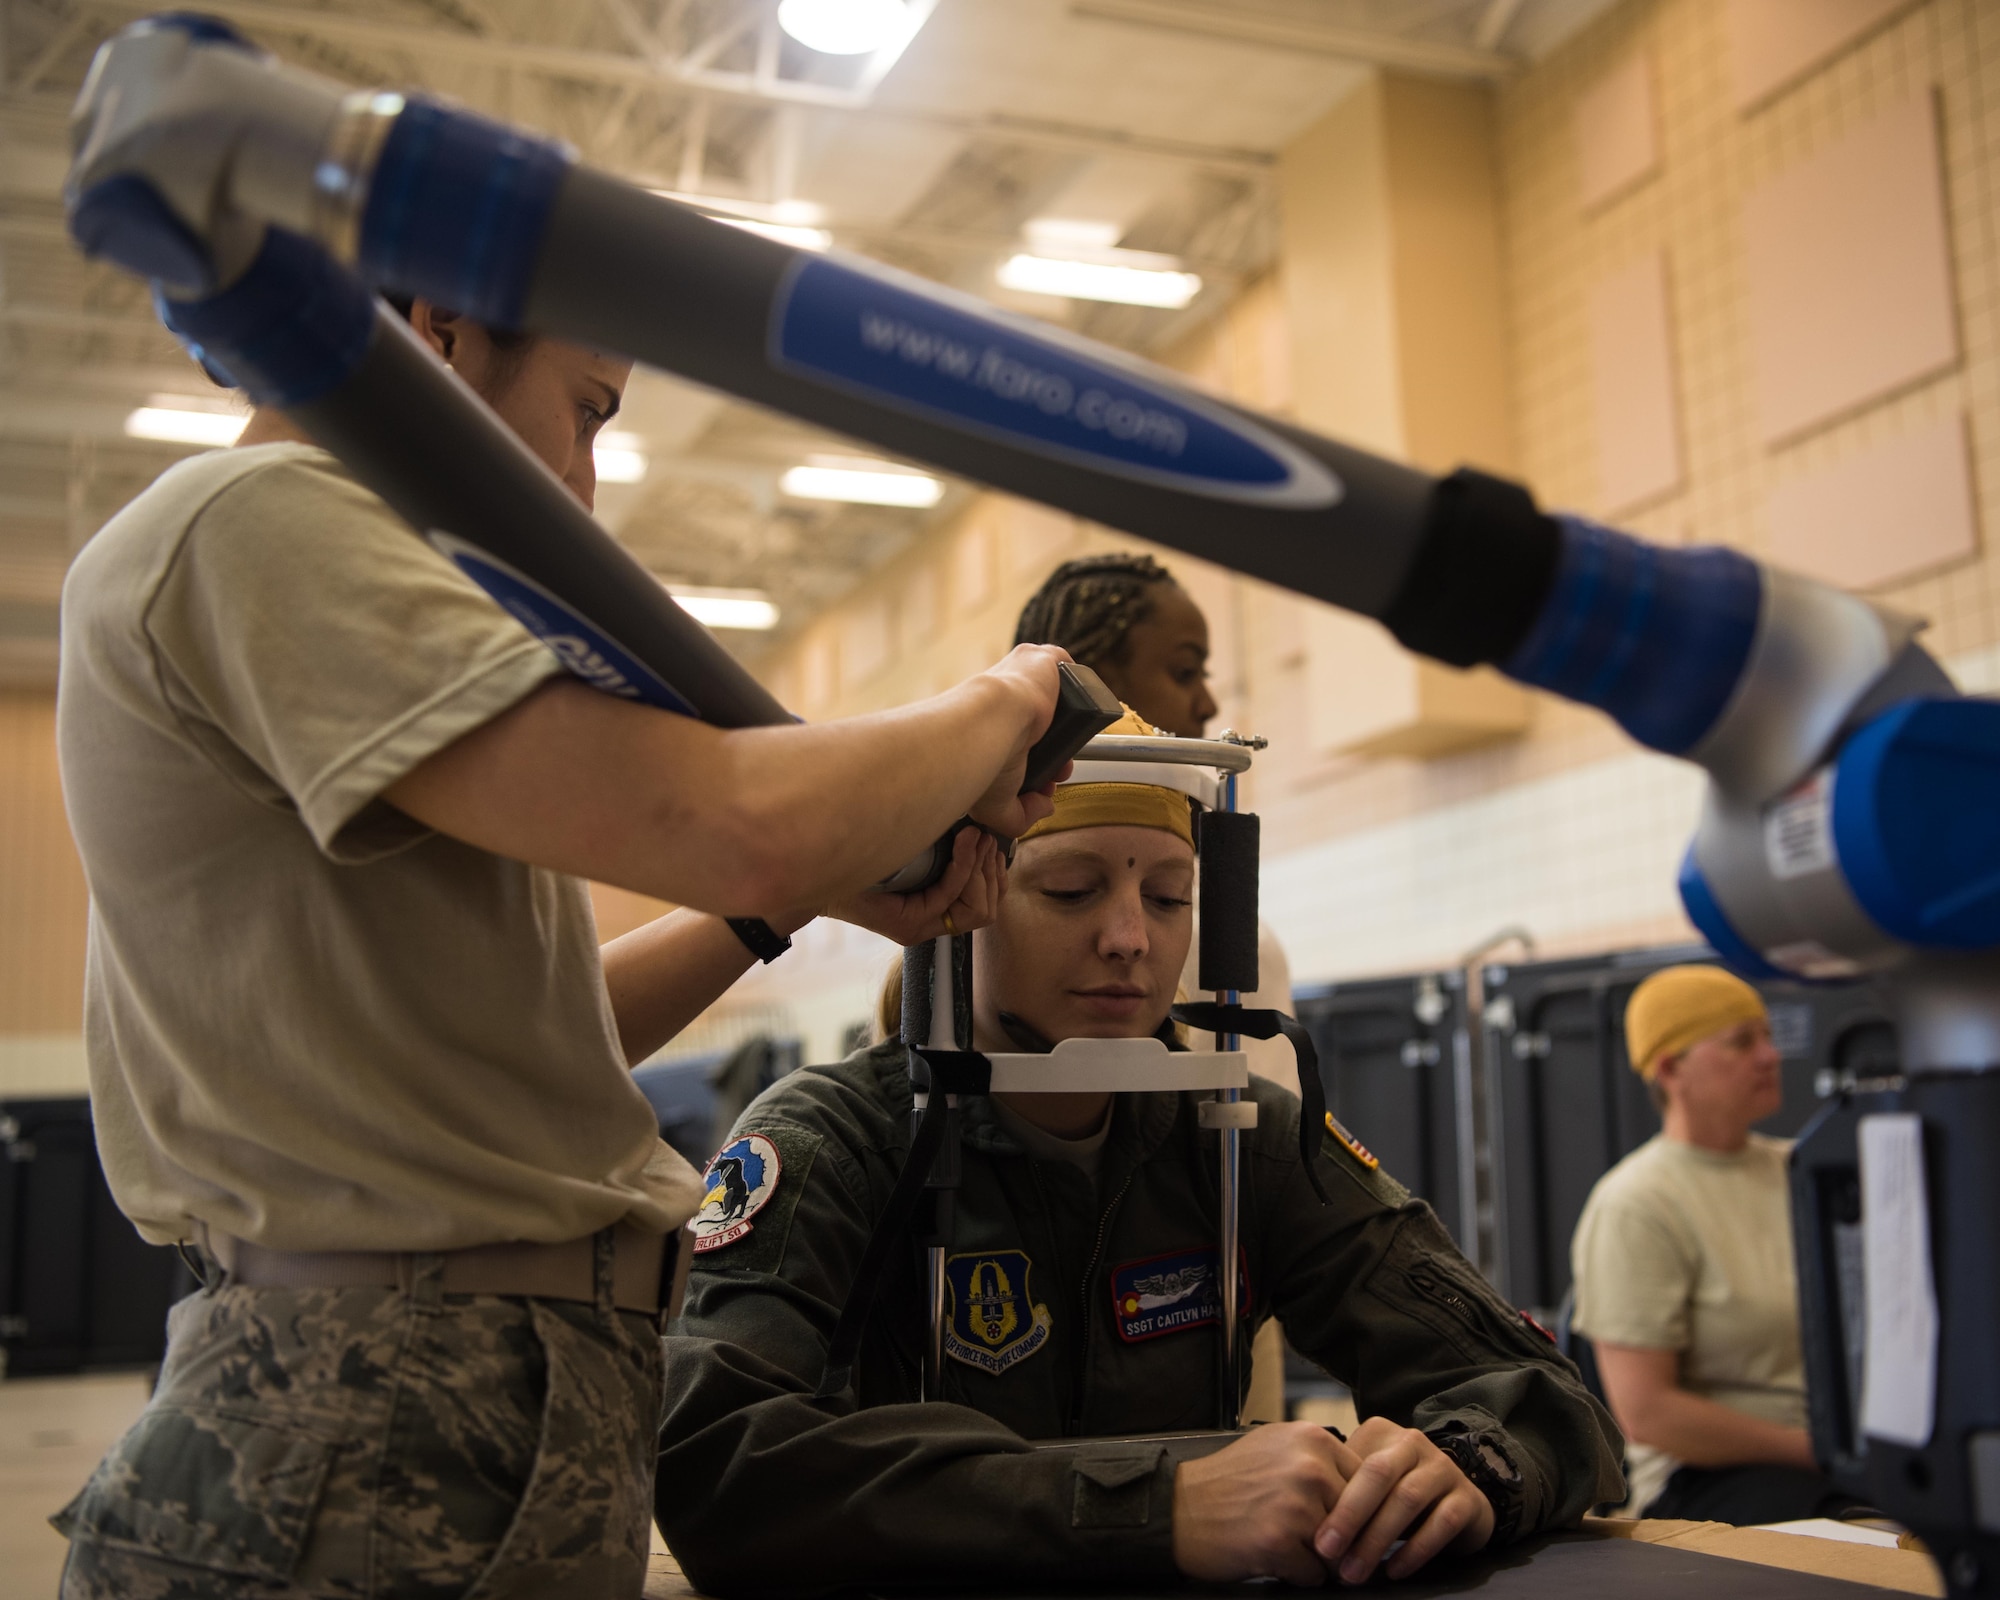 An Airman gets her head measured at the Female Fitment Event at Joint Base Langley-Eustis, Virginia, June 4. The purpose of the event was to take the measurements of female aviators to use when designing female flight equipment prototypes.